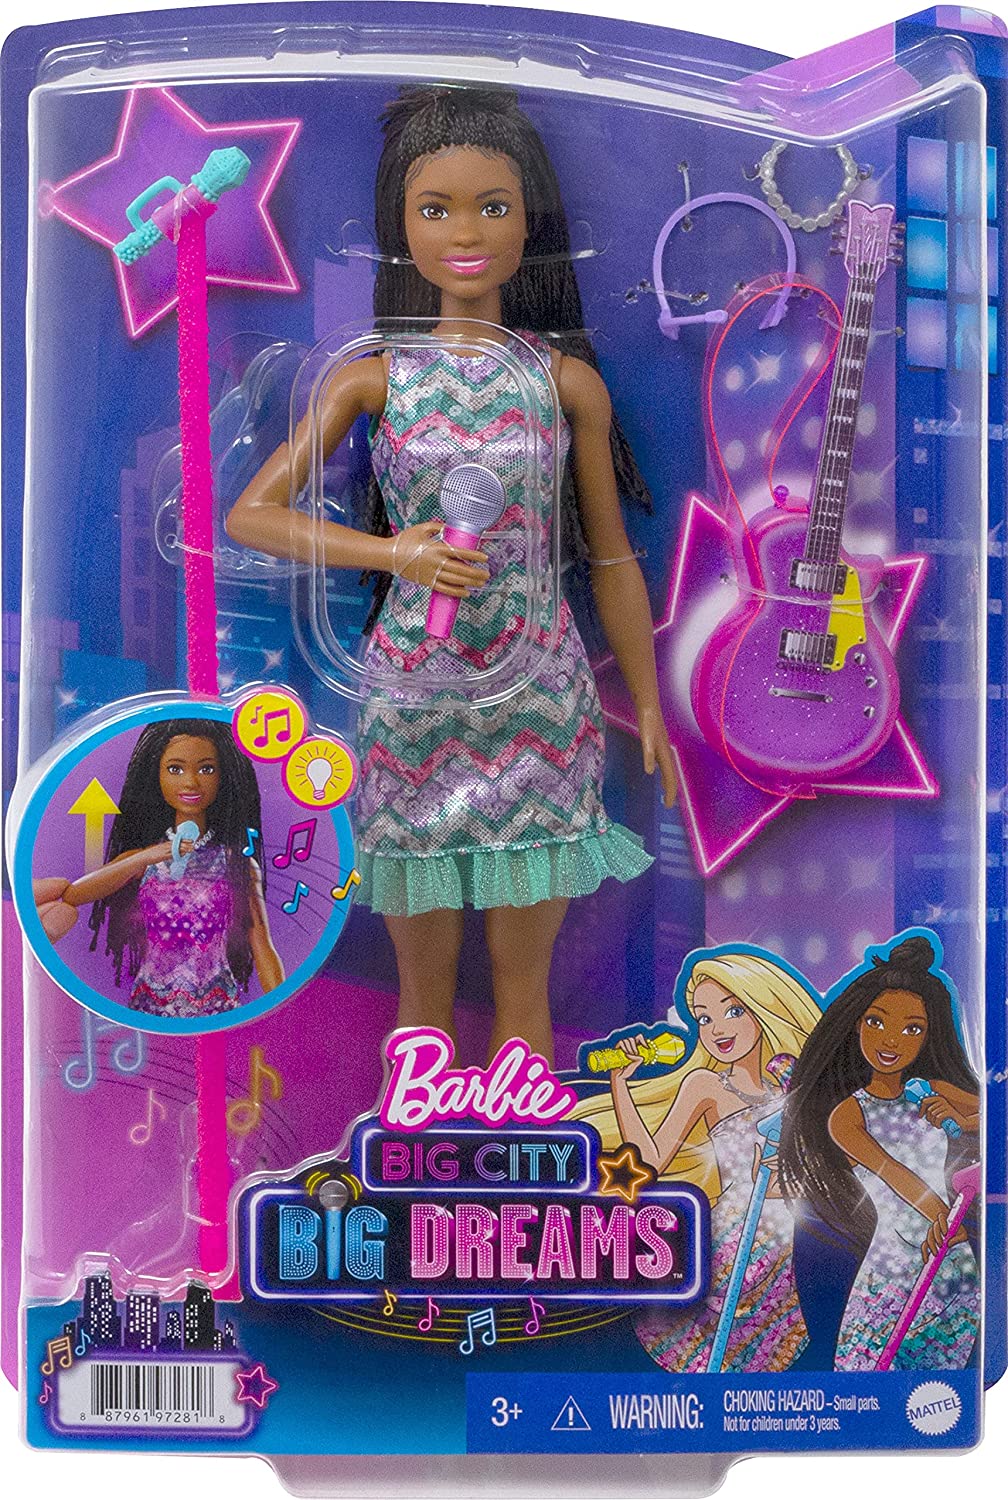 Barbie Big City, Big Dreams Singing Barbie “Brooklyn” Roberts Doll (11.5-in Brunette with Braids) with Music, Light-Up Feature